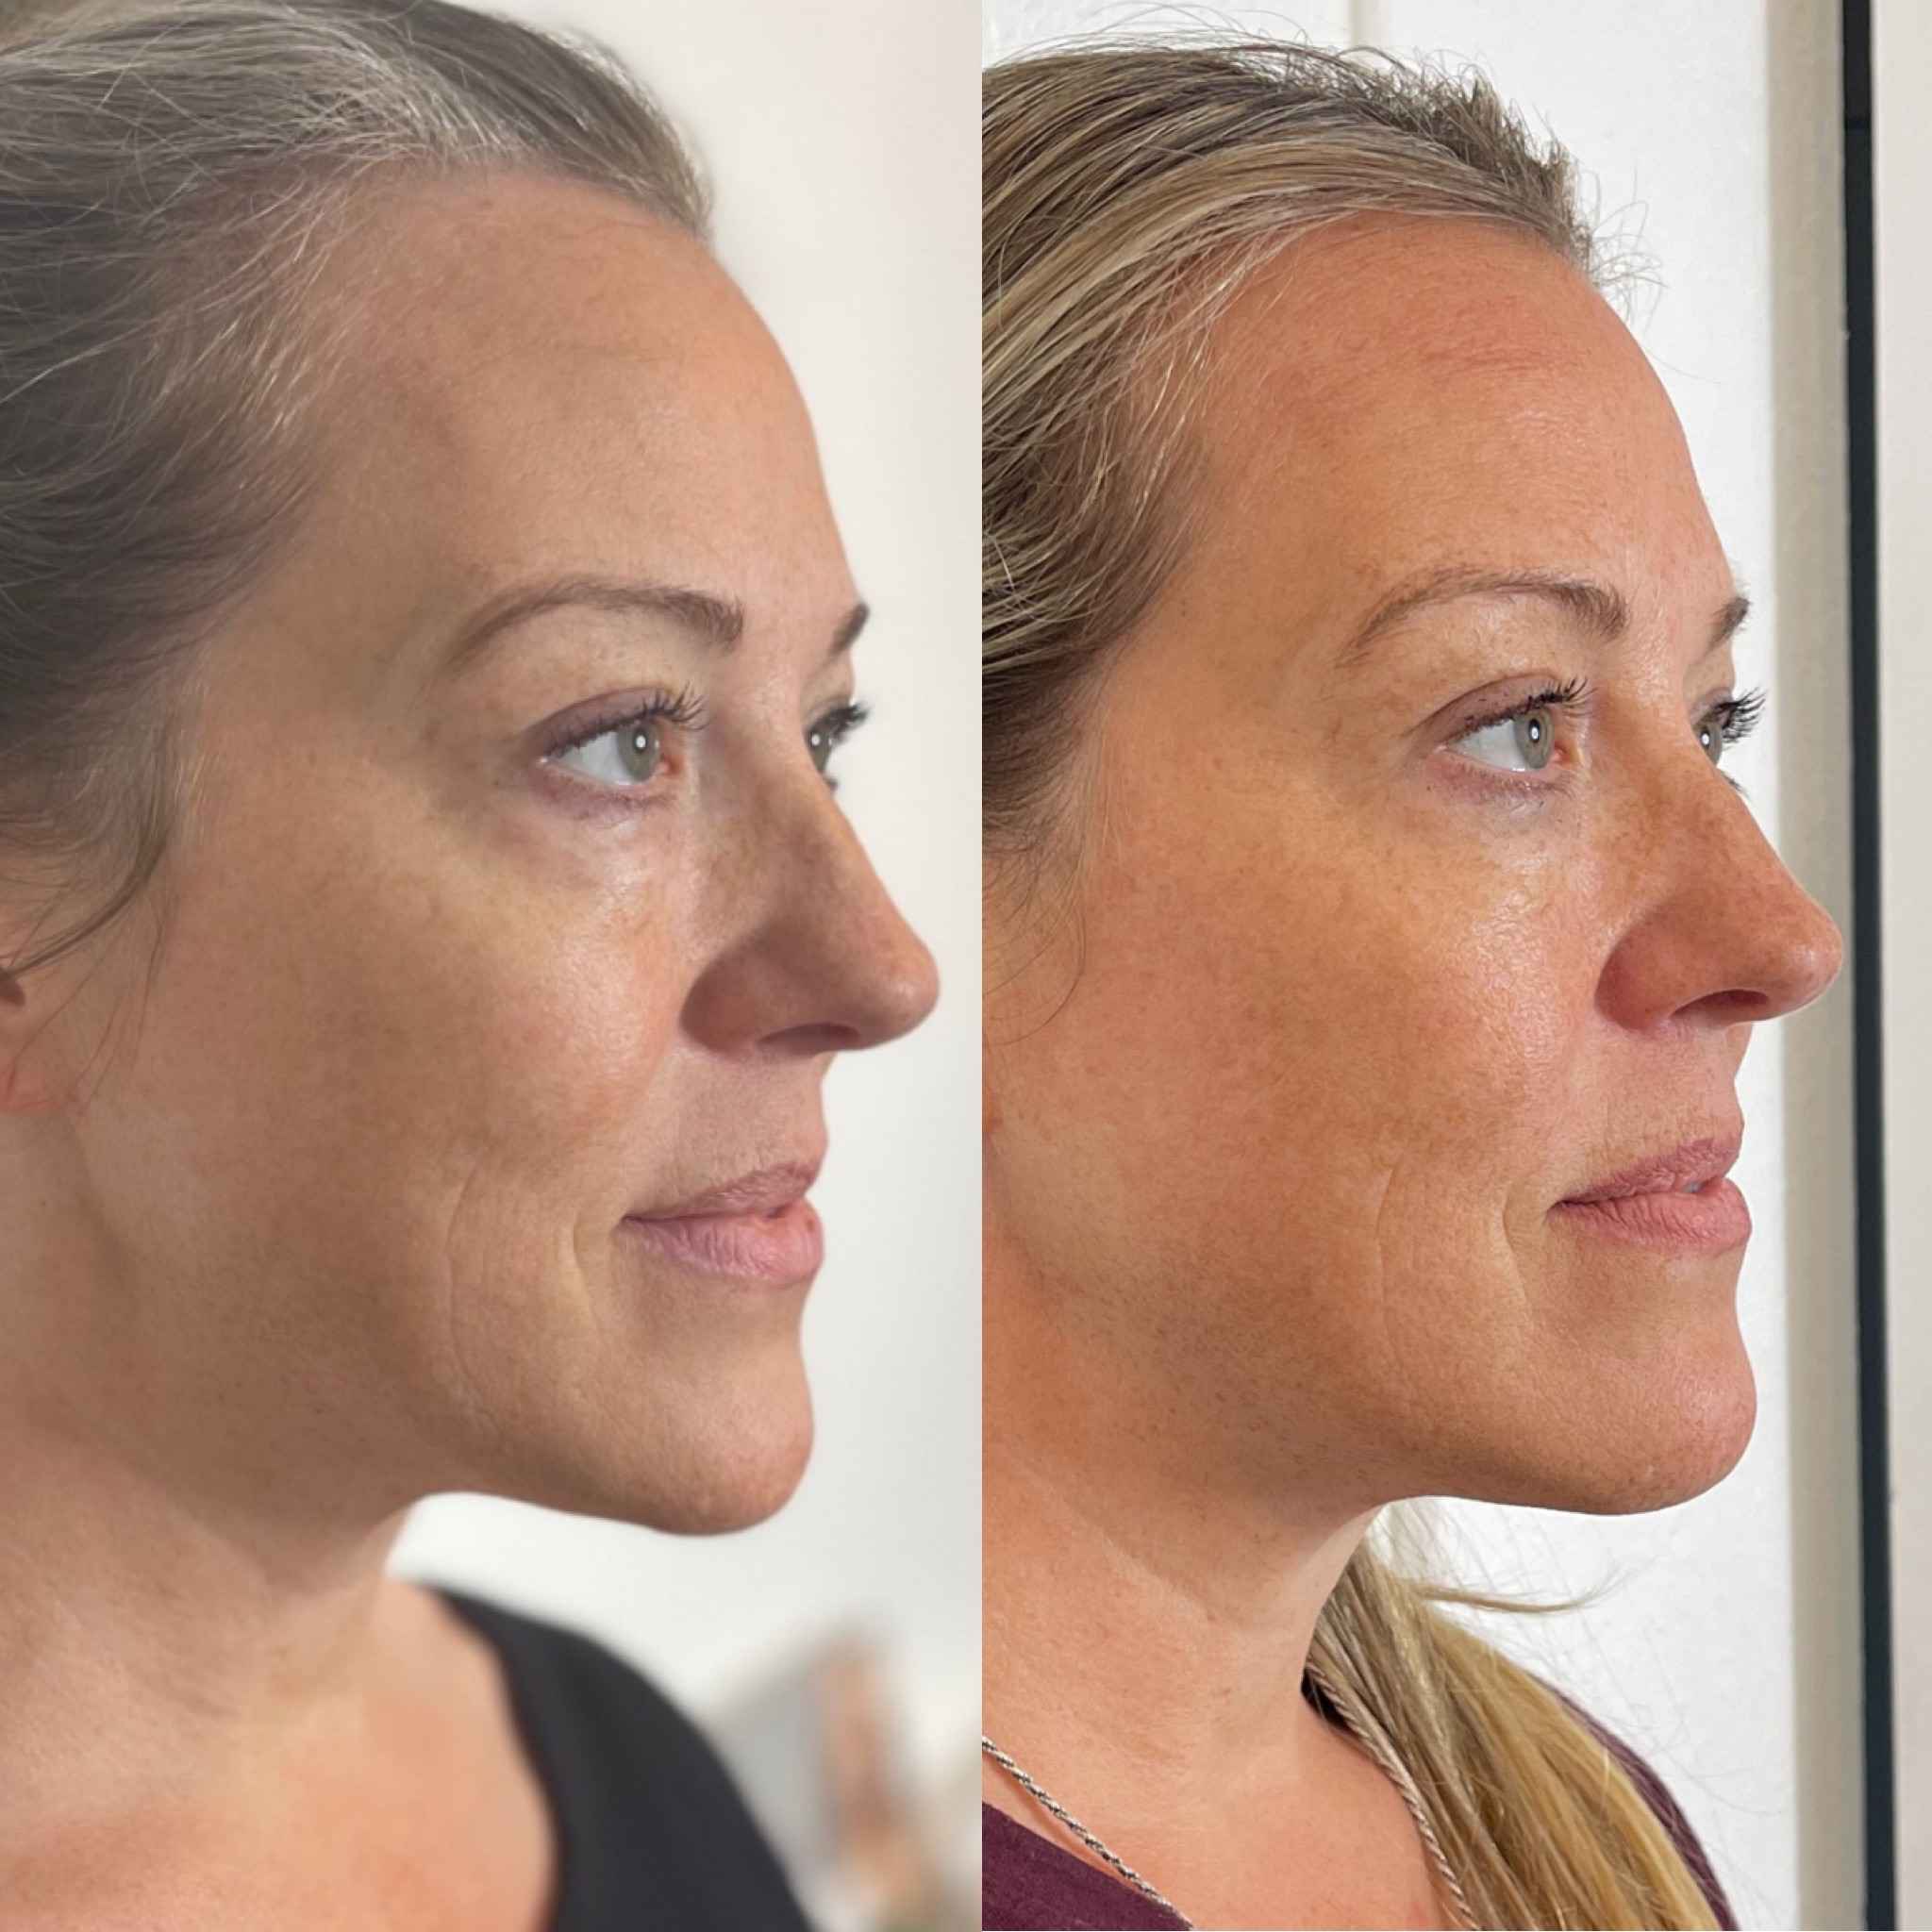 Before and After Bio Stimulator Treatment | Onyx Medical Aesthetics | Homann Dr. S.E. suite B Lacey, WA